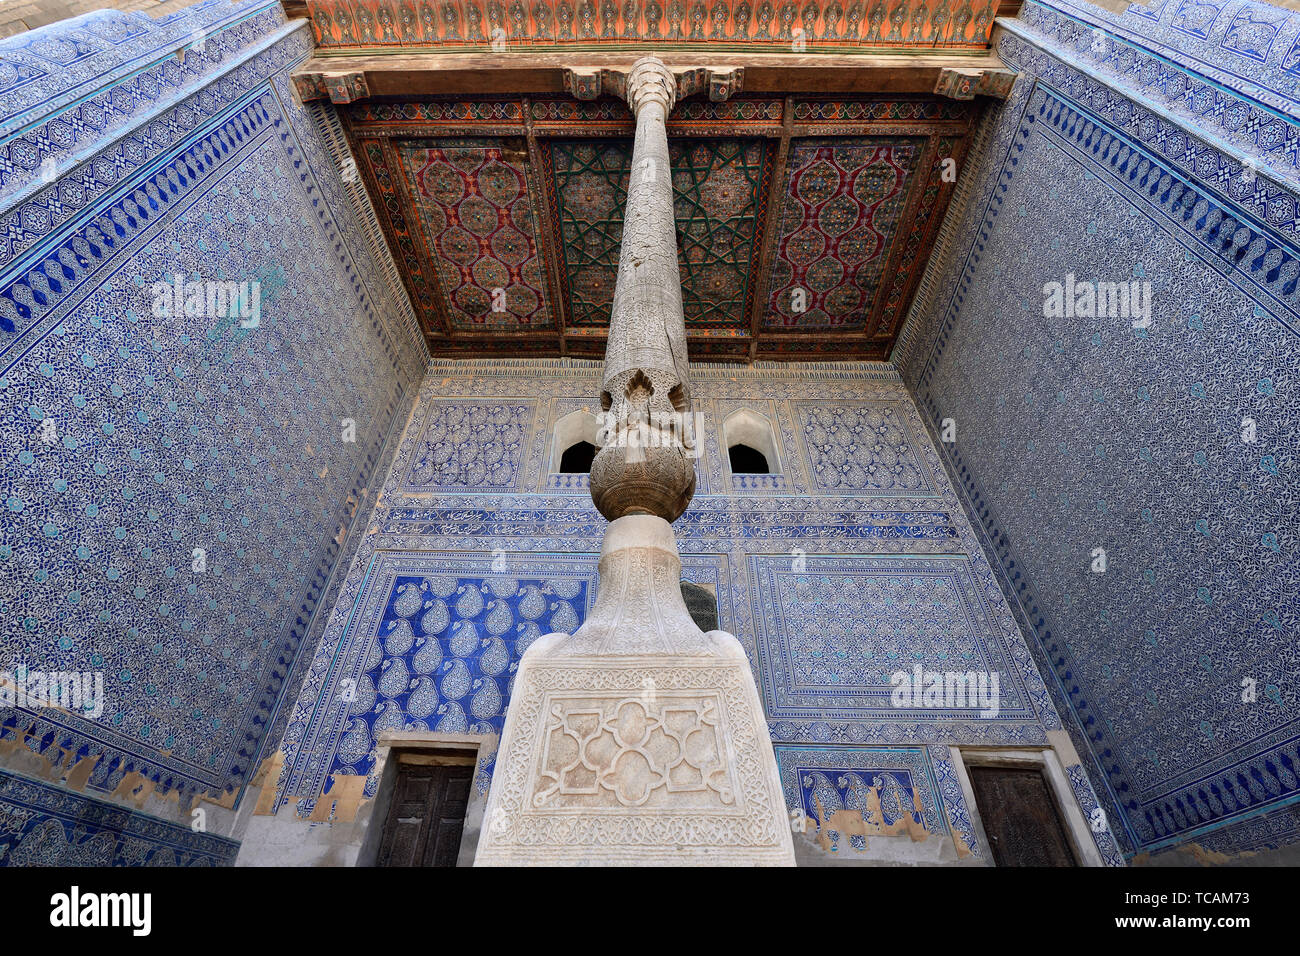 TOSH-HOVLI, KHIVA, UZBEKISTAN - 02 MAY 2019: Most sumptuous interior decoration of the Tosh-Hovli palace in Khiva in the Silk Road Stock Photo